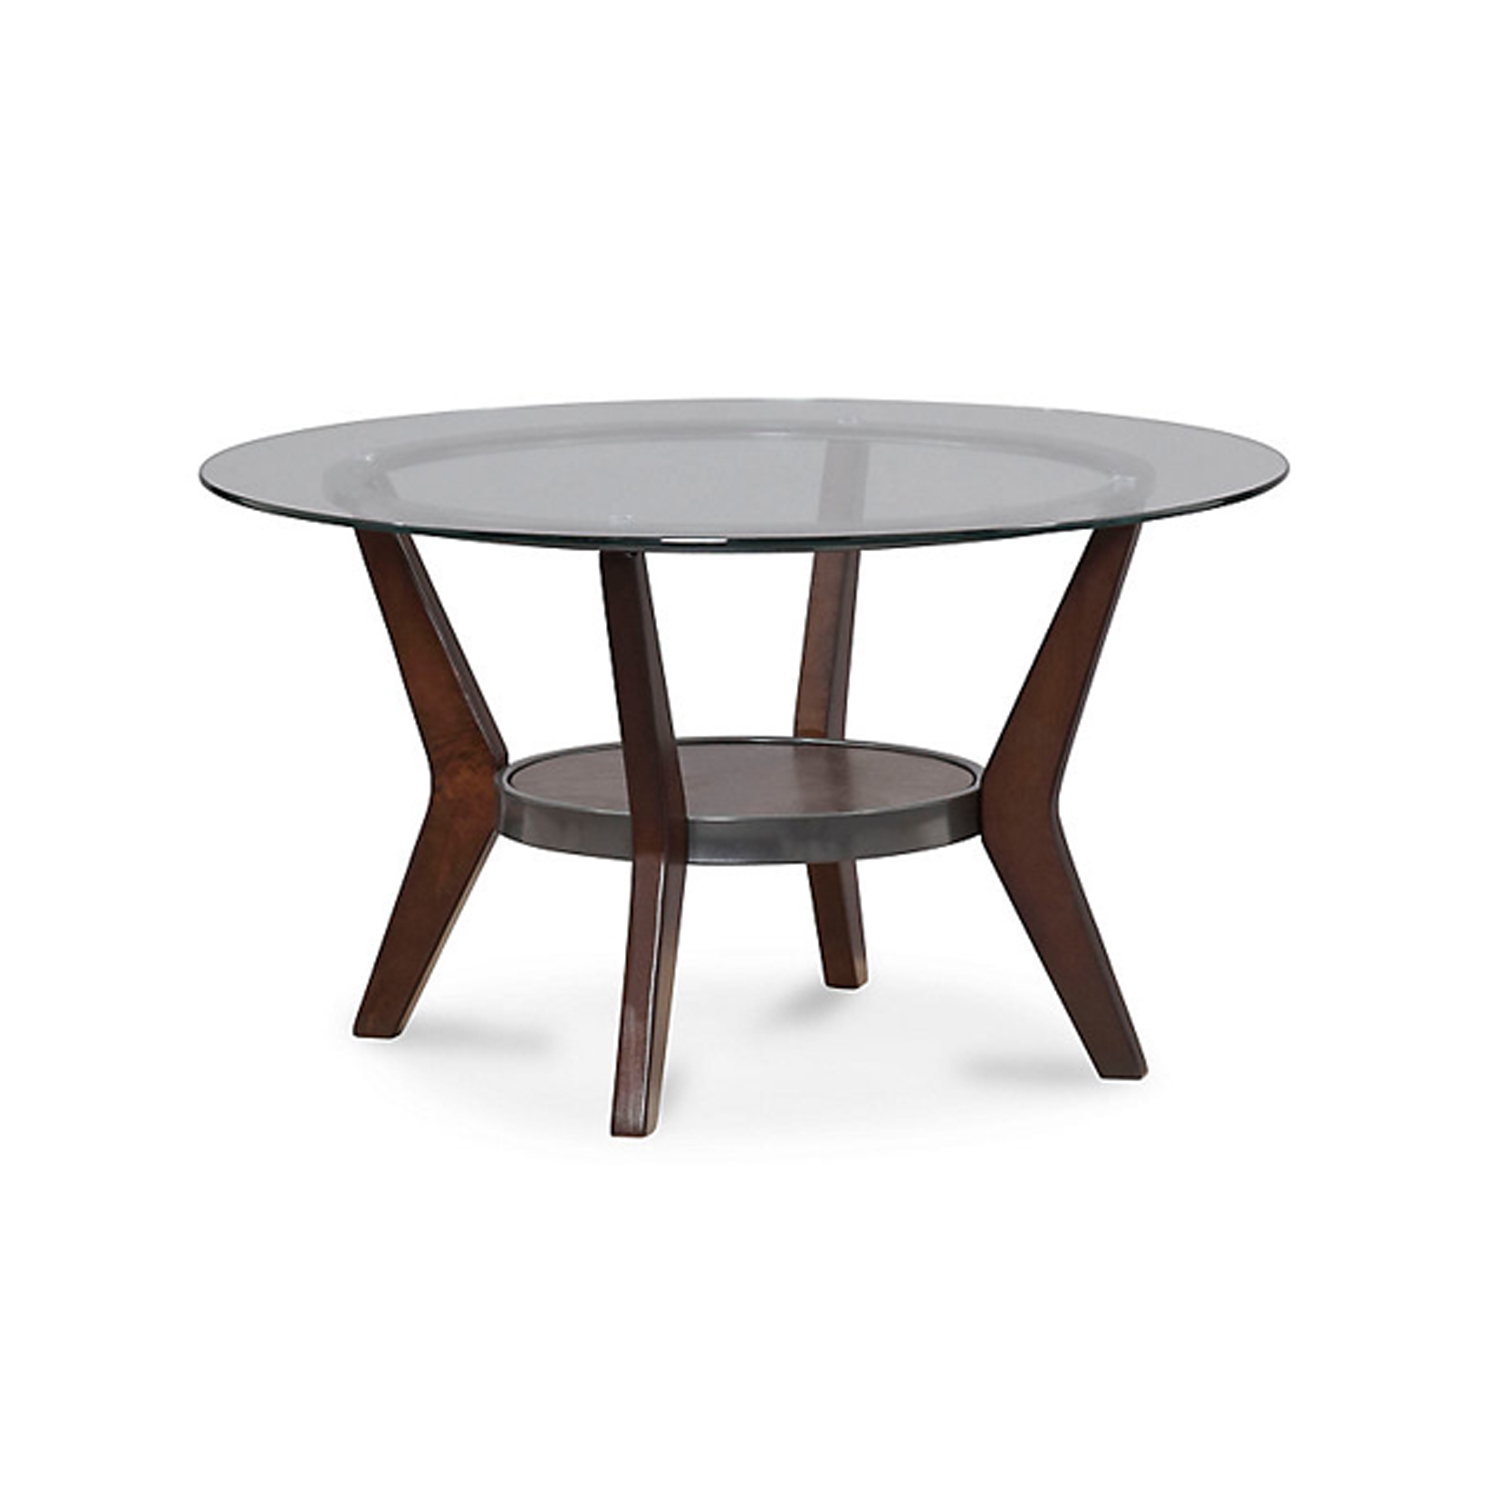 Round Wooden Table Set With Glass Top And Lower Shelf, Set Of Three, Brown And Clear- Saltoro Sherpi